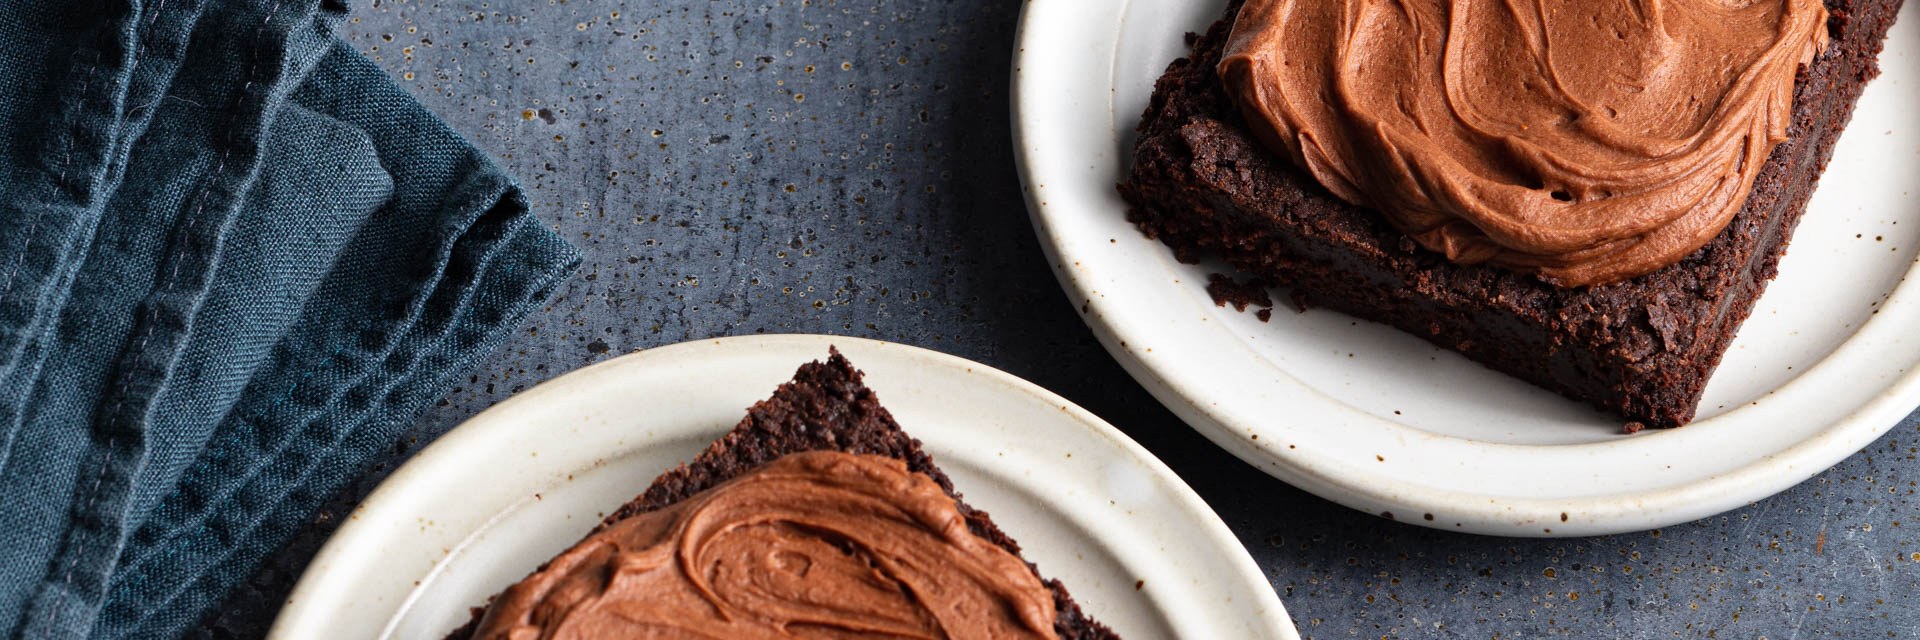 Spiced Mexican Chocolate Brownies & Frosting